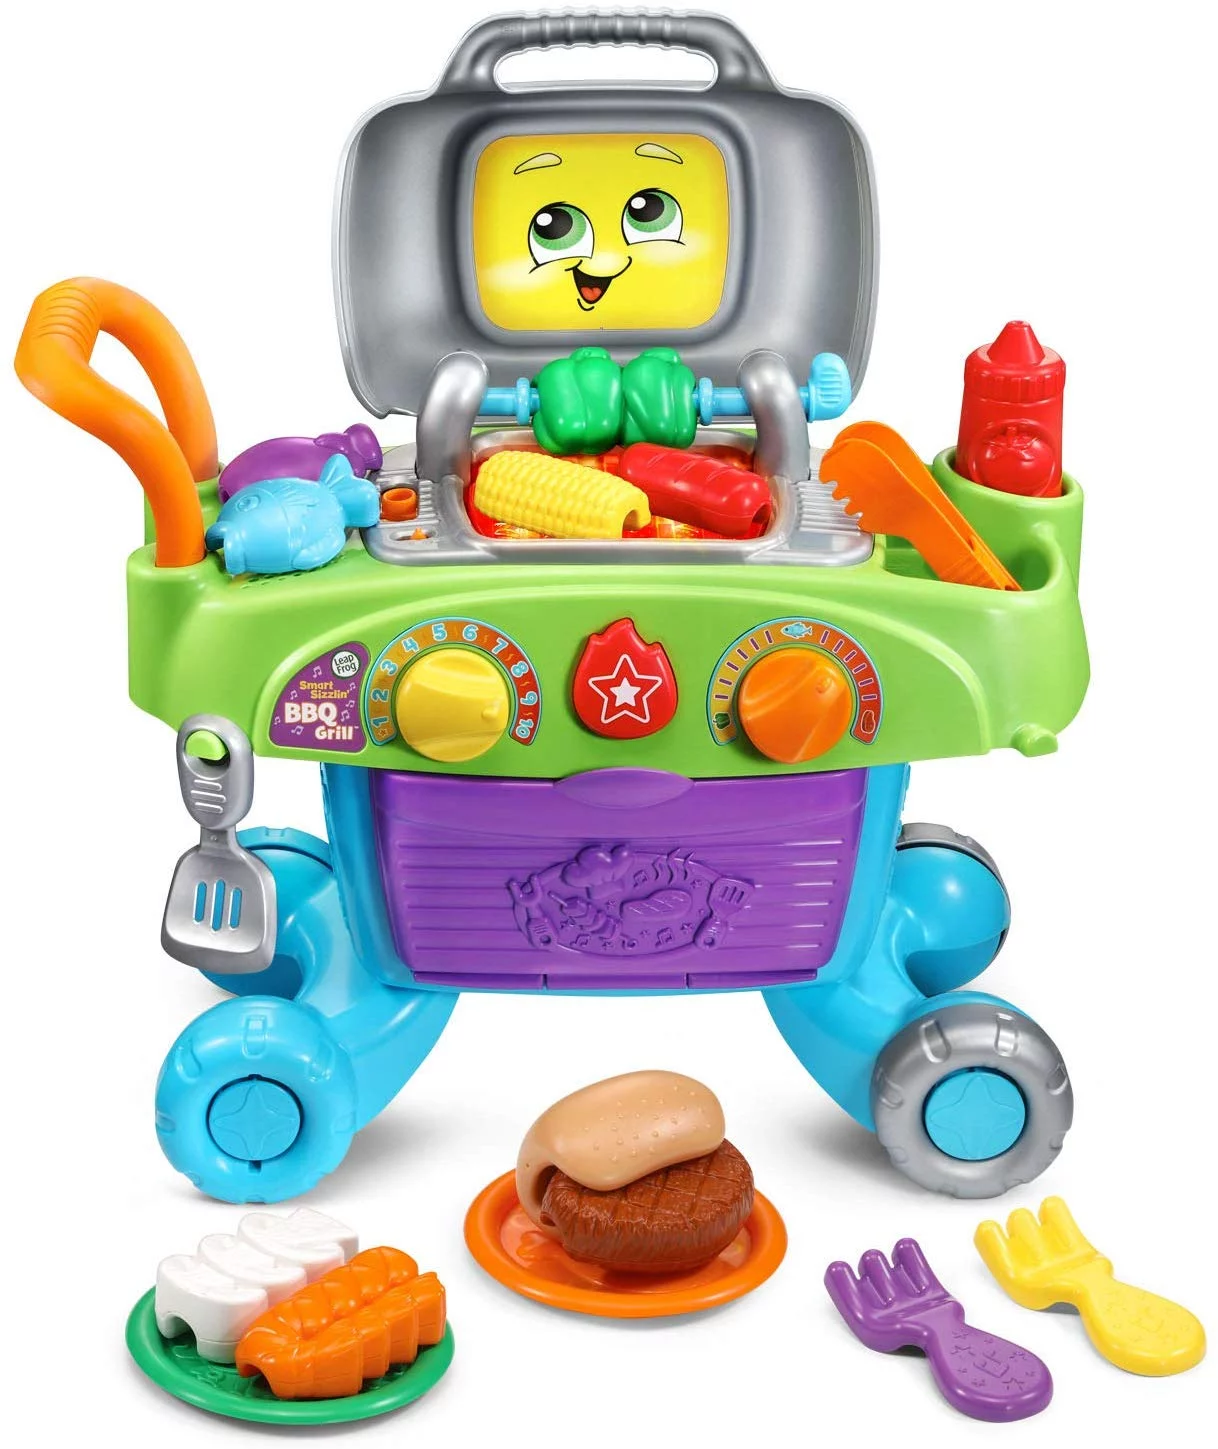 Best Gifts For Two Year Old 2022: Smart BBQ Toy 2022